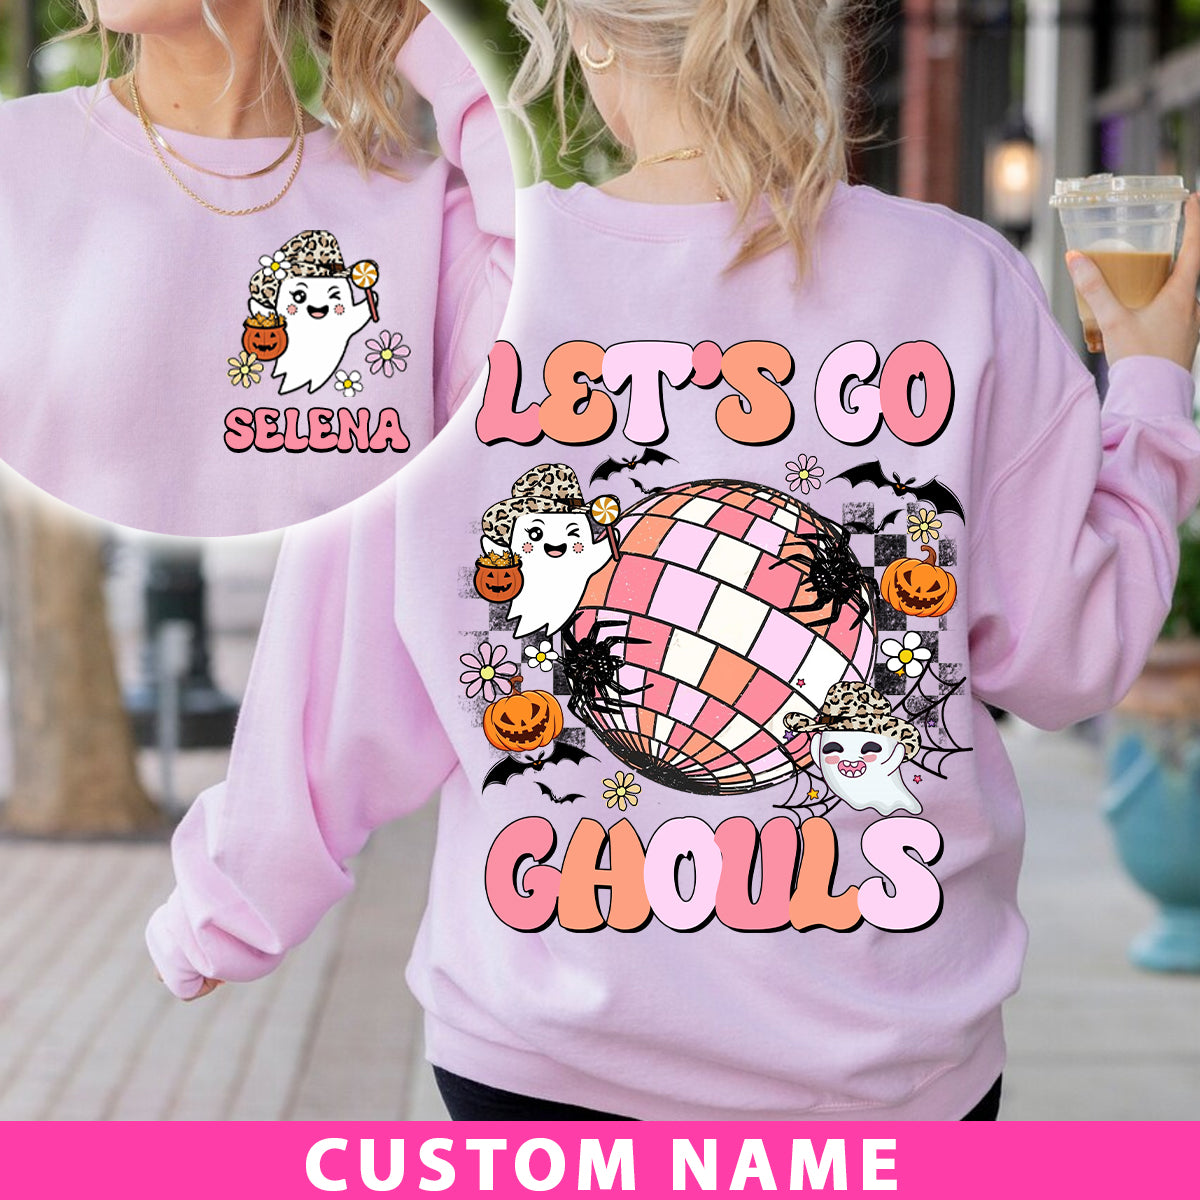 Let's Go Ghouls- Custom Name - Personalized 2 Side Sweatshirt - Halloween Family Gift